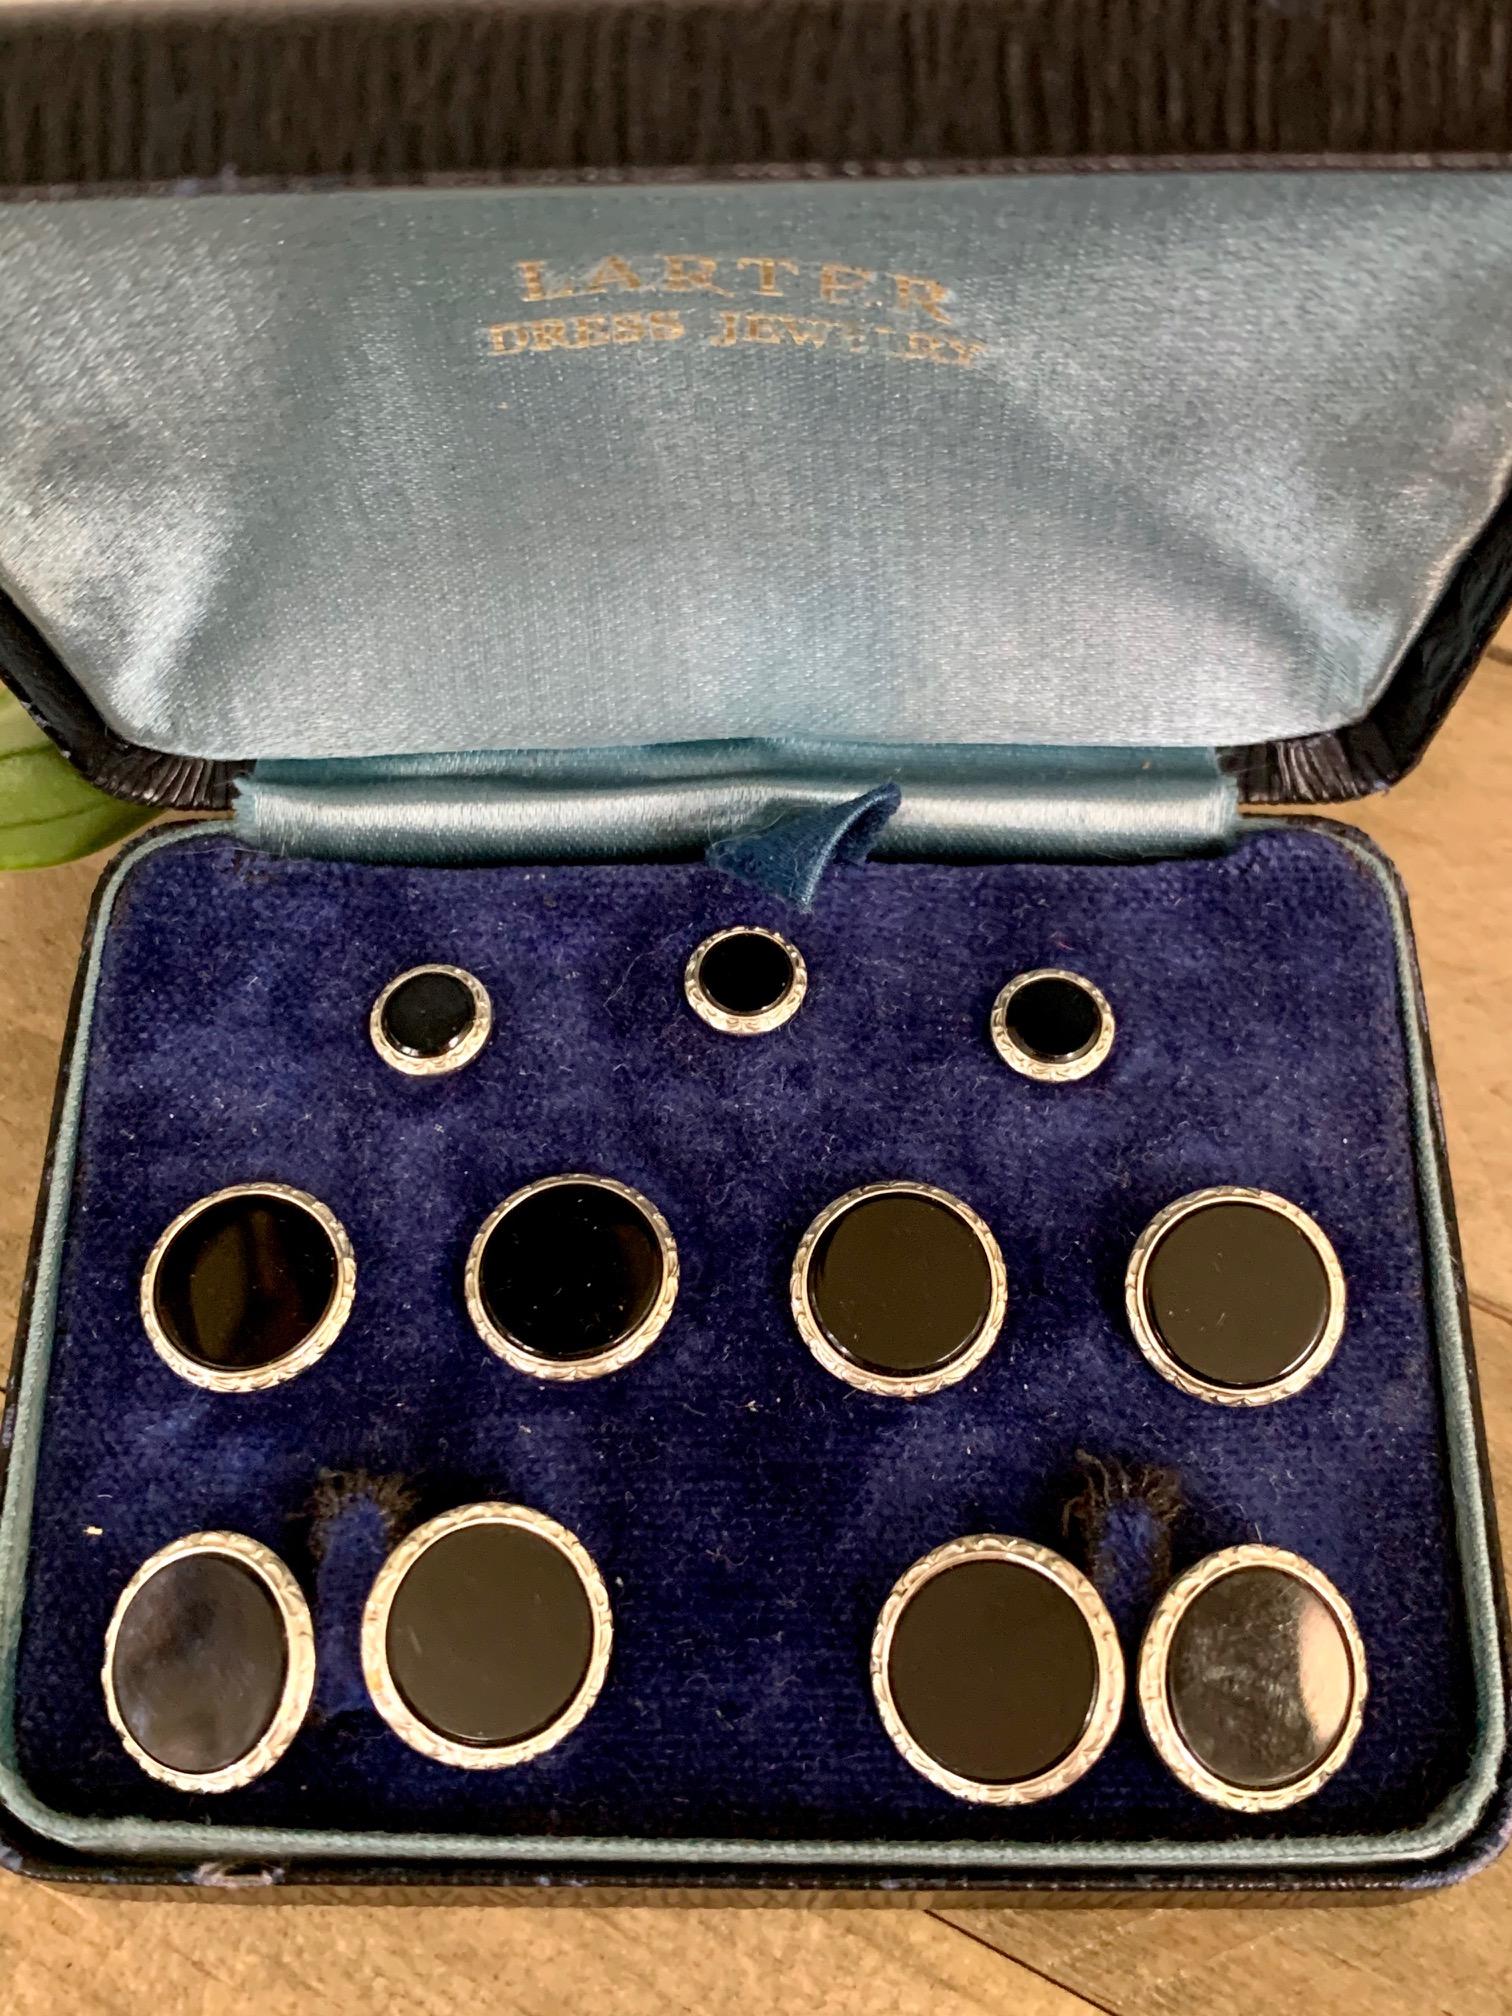 This very handsome Larter & Sons Art Deco cufflinks and stud set have a center stone of black onyx, surrounded by a yellow and white gold setting.  It is a full nine piece set with all pieces in excellent condition.

They are stamped 